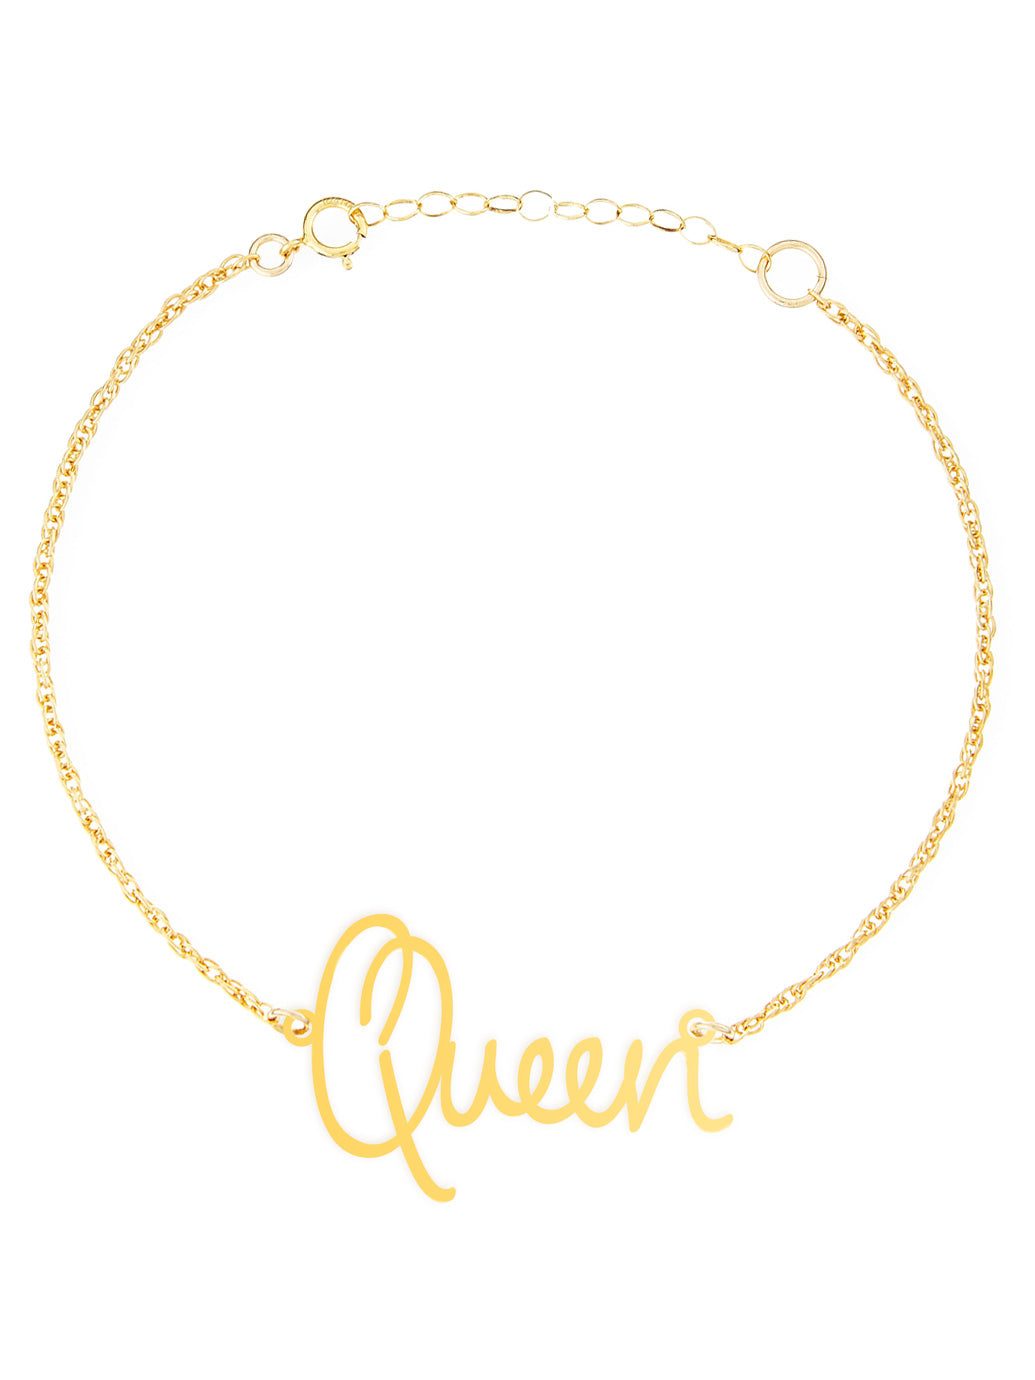 Queen Bracelet - High Quality, Affordable, Hand Written, Empowering, Self Love, Mantra Word Bracelet - Available in Gold and Silver - Made in USA - Brevity Jewelry